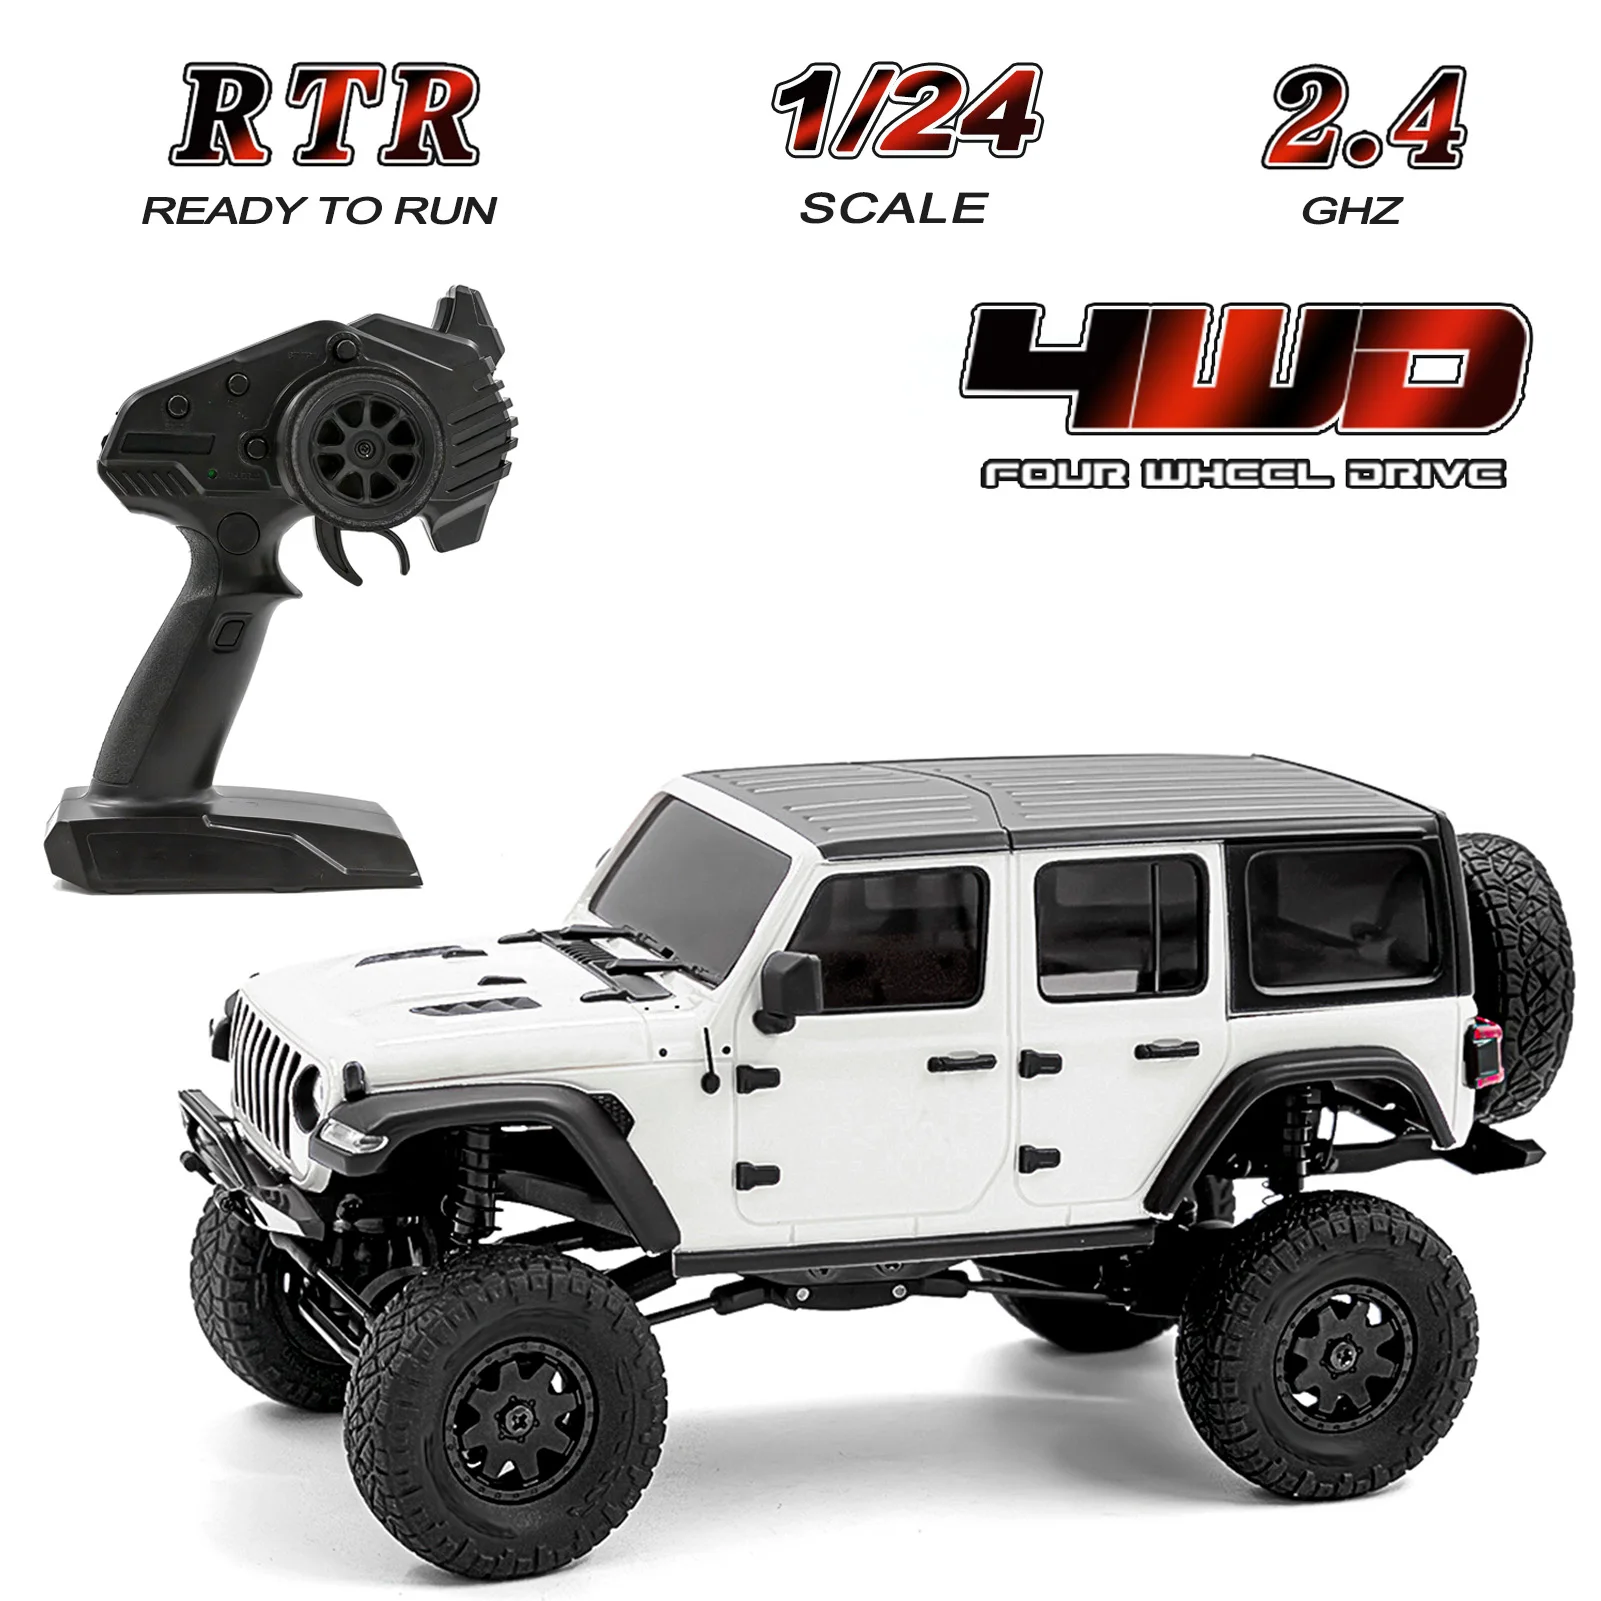 

2.4GHz RC Car 4WD 1:24 Mini RC Crawler Simulation Buggy Electric Remote Control Model Cars RTR Adult Children Toy